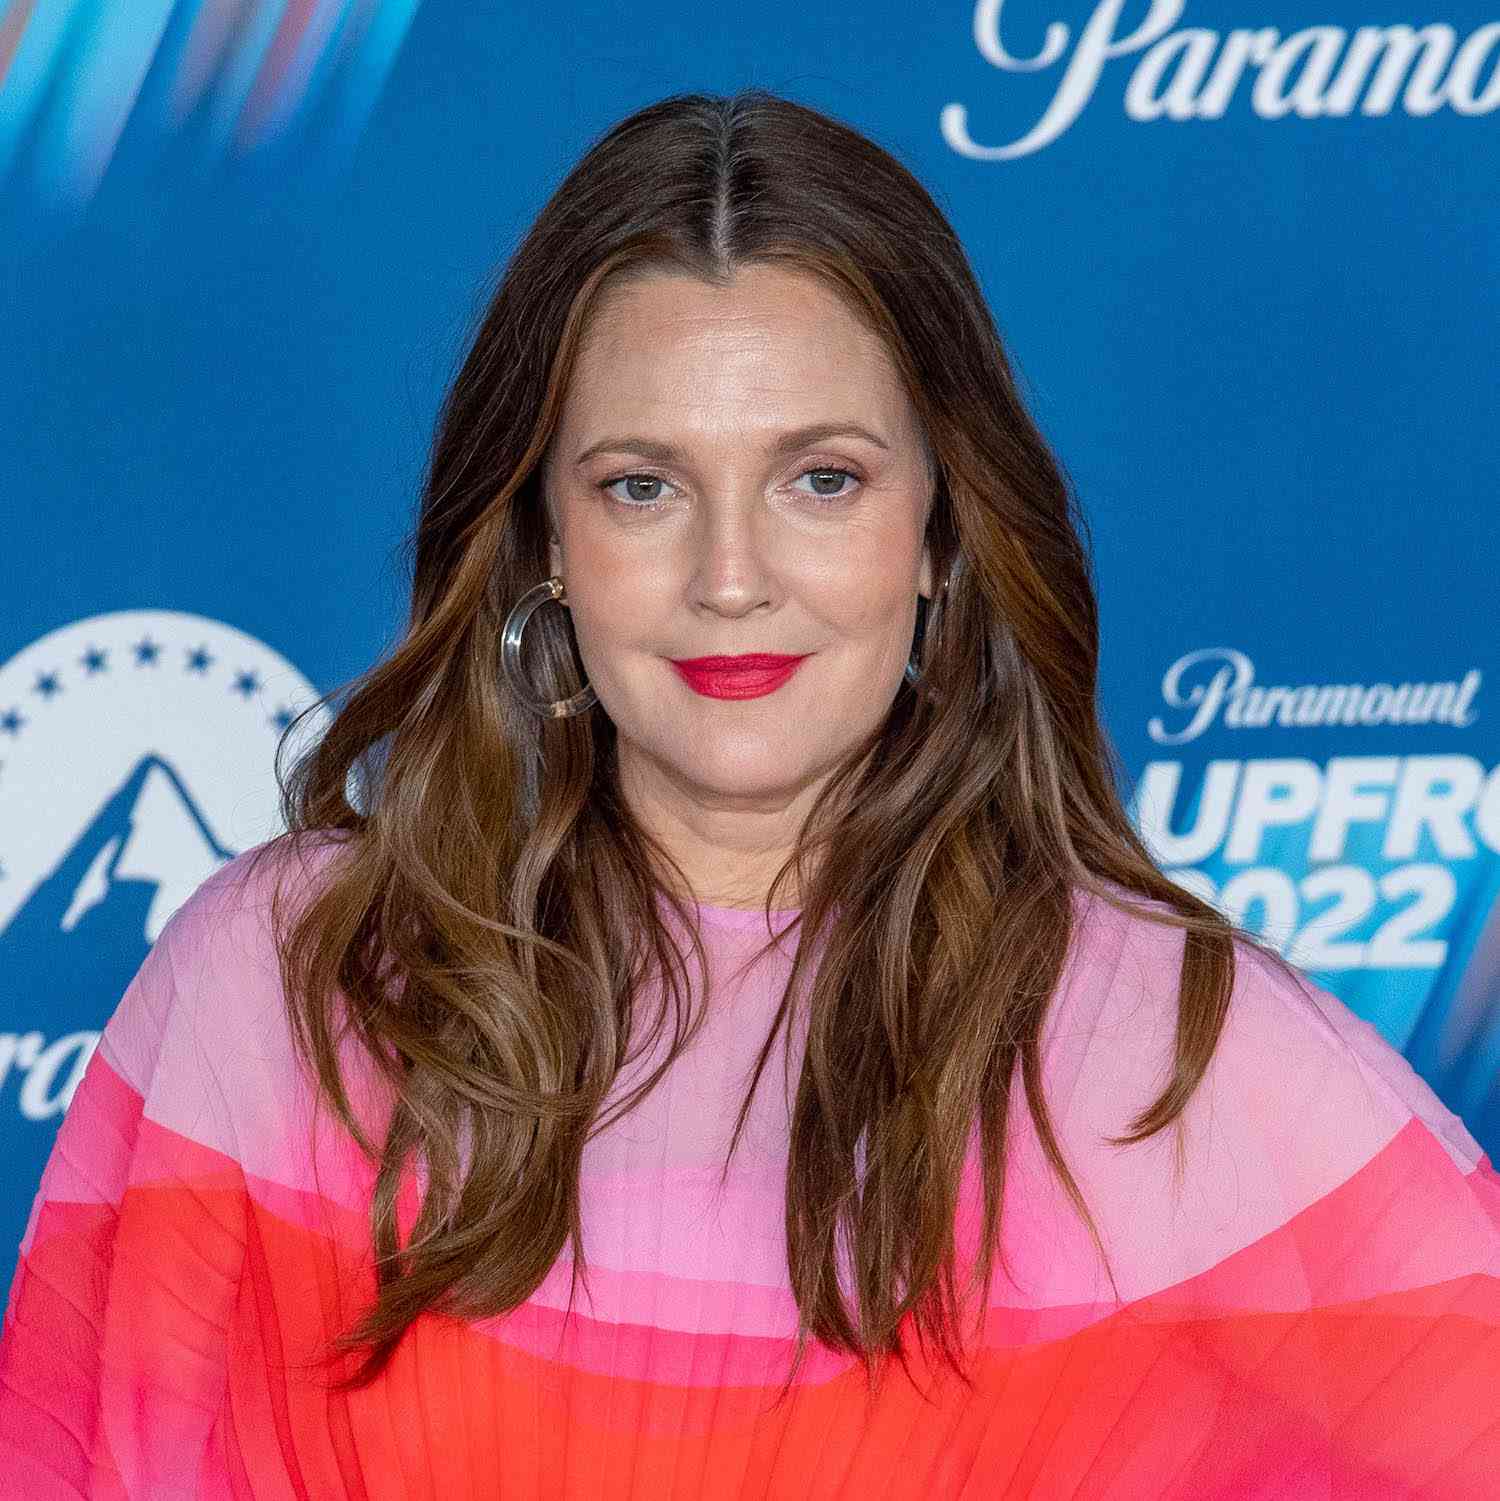 Drew Barrymore wears an undone, tousled wavy. hairstyle with face-framing layers